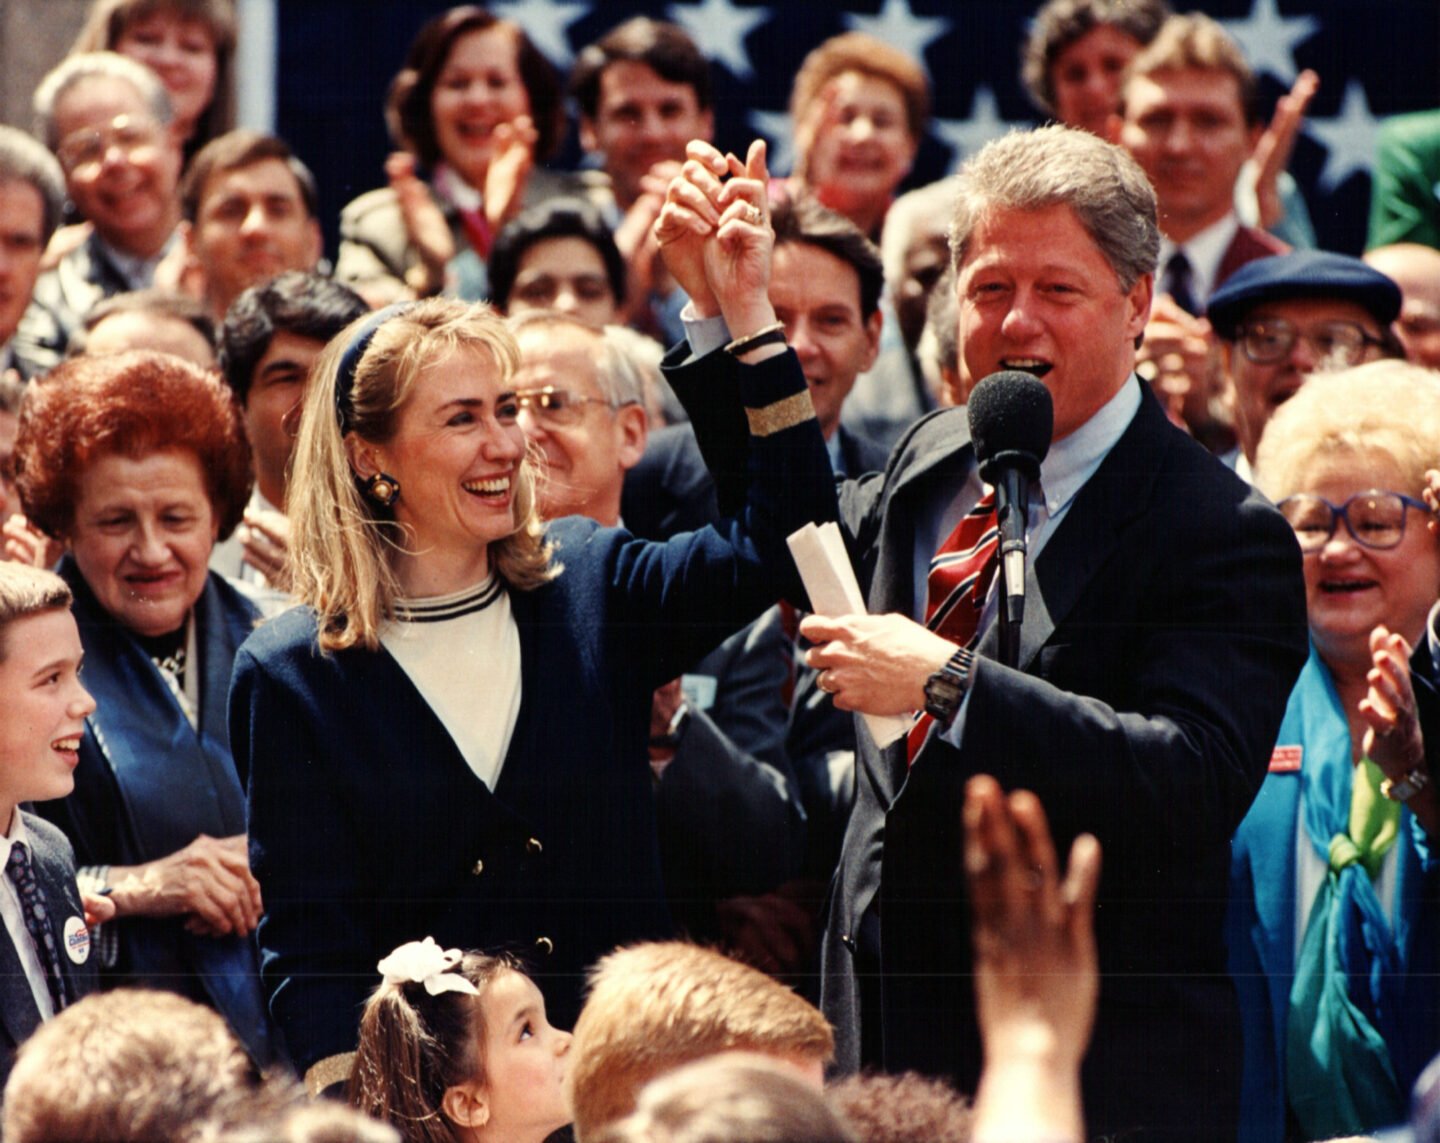 Then-Governor Bill Clinton and Hillary Clinton stand amid a crowd at a rally